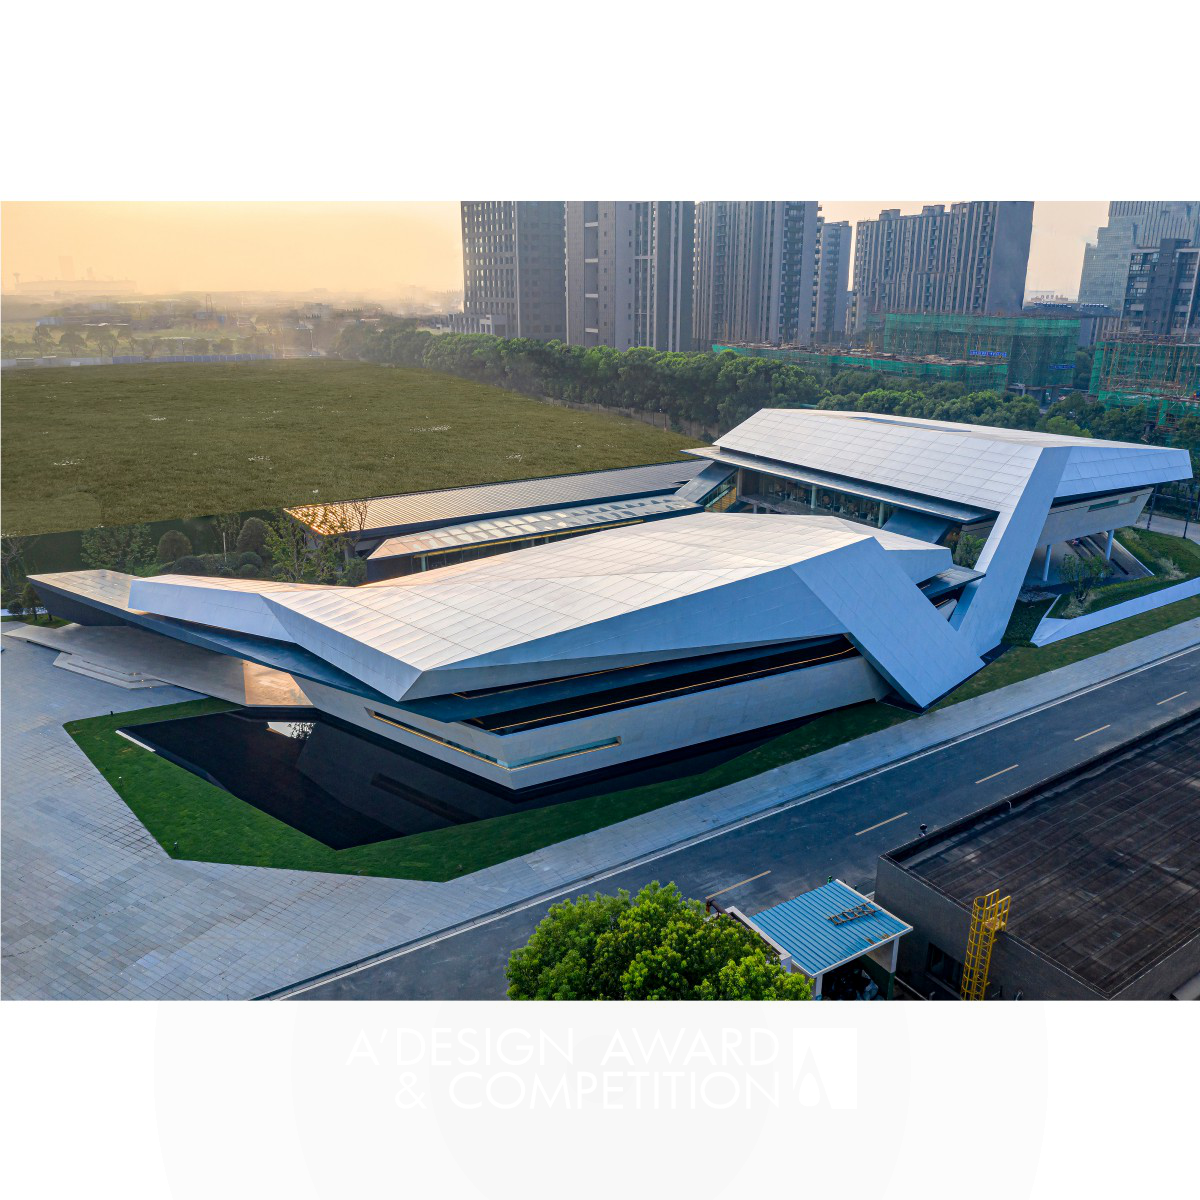 Fly Exhibition Center by Kris Lin Golden Architecture, Building and Structure Design Award Winner 2020 